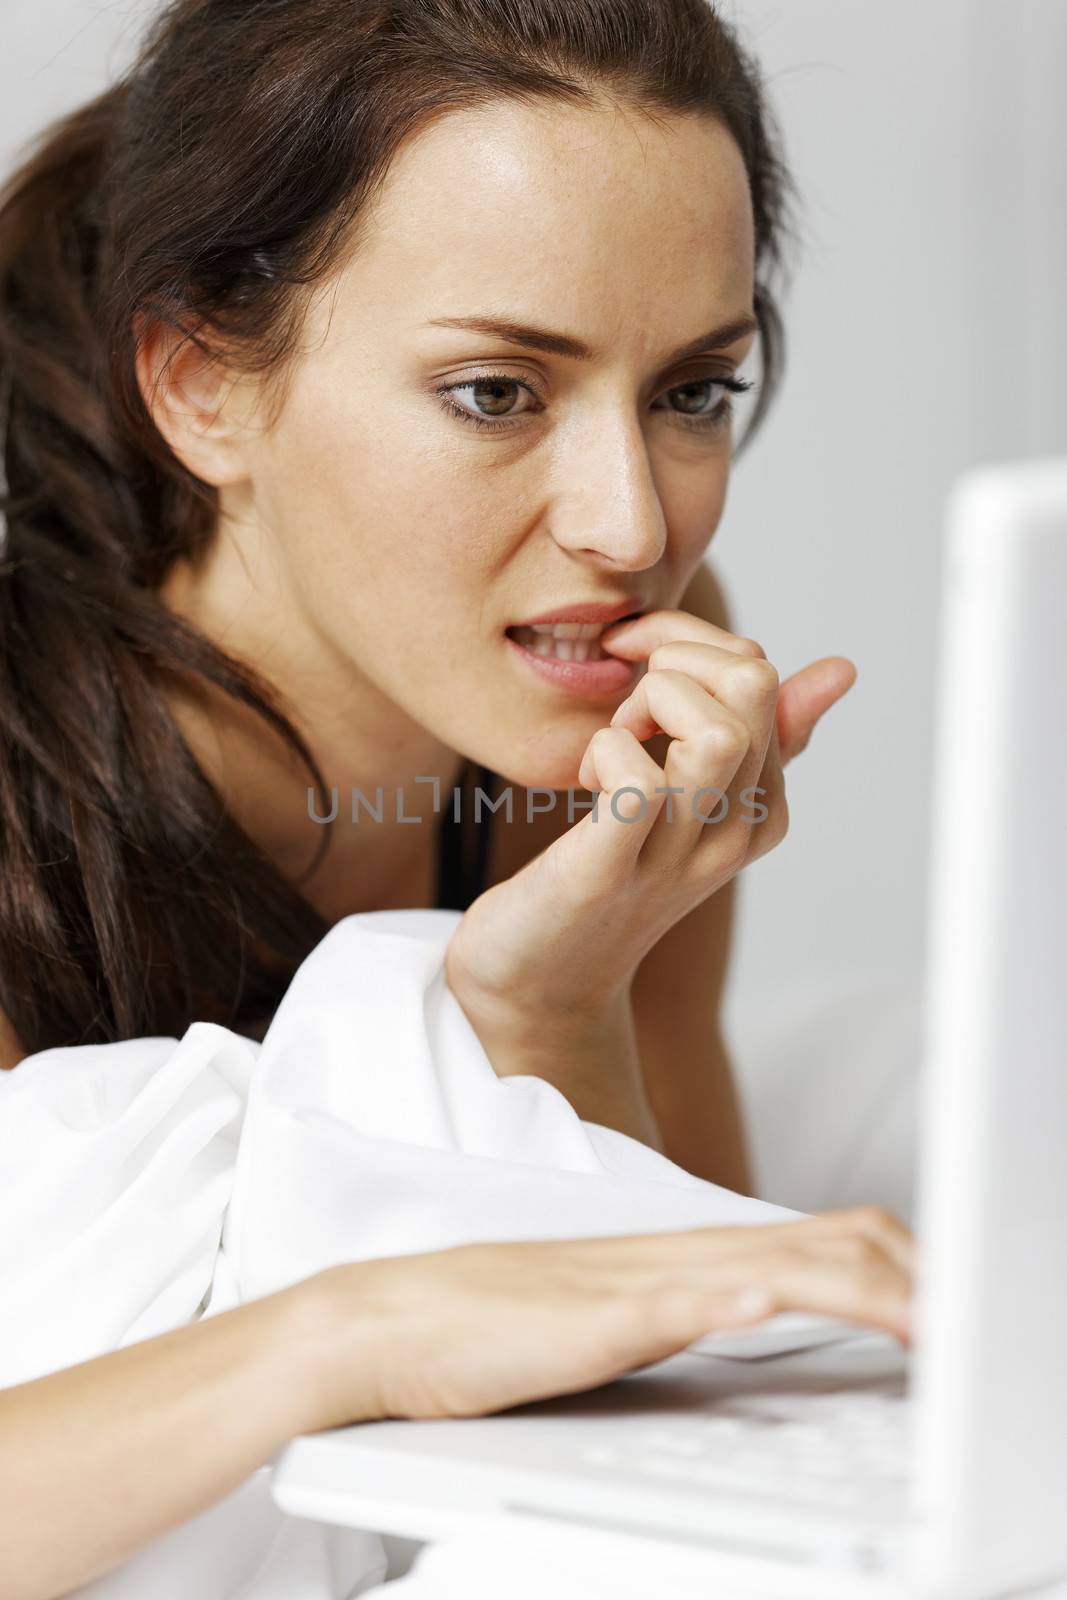 Young woman using her laptop in bed